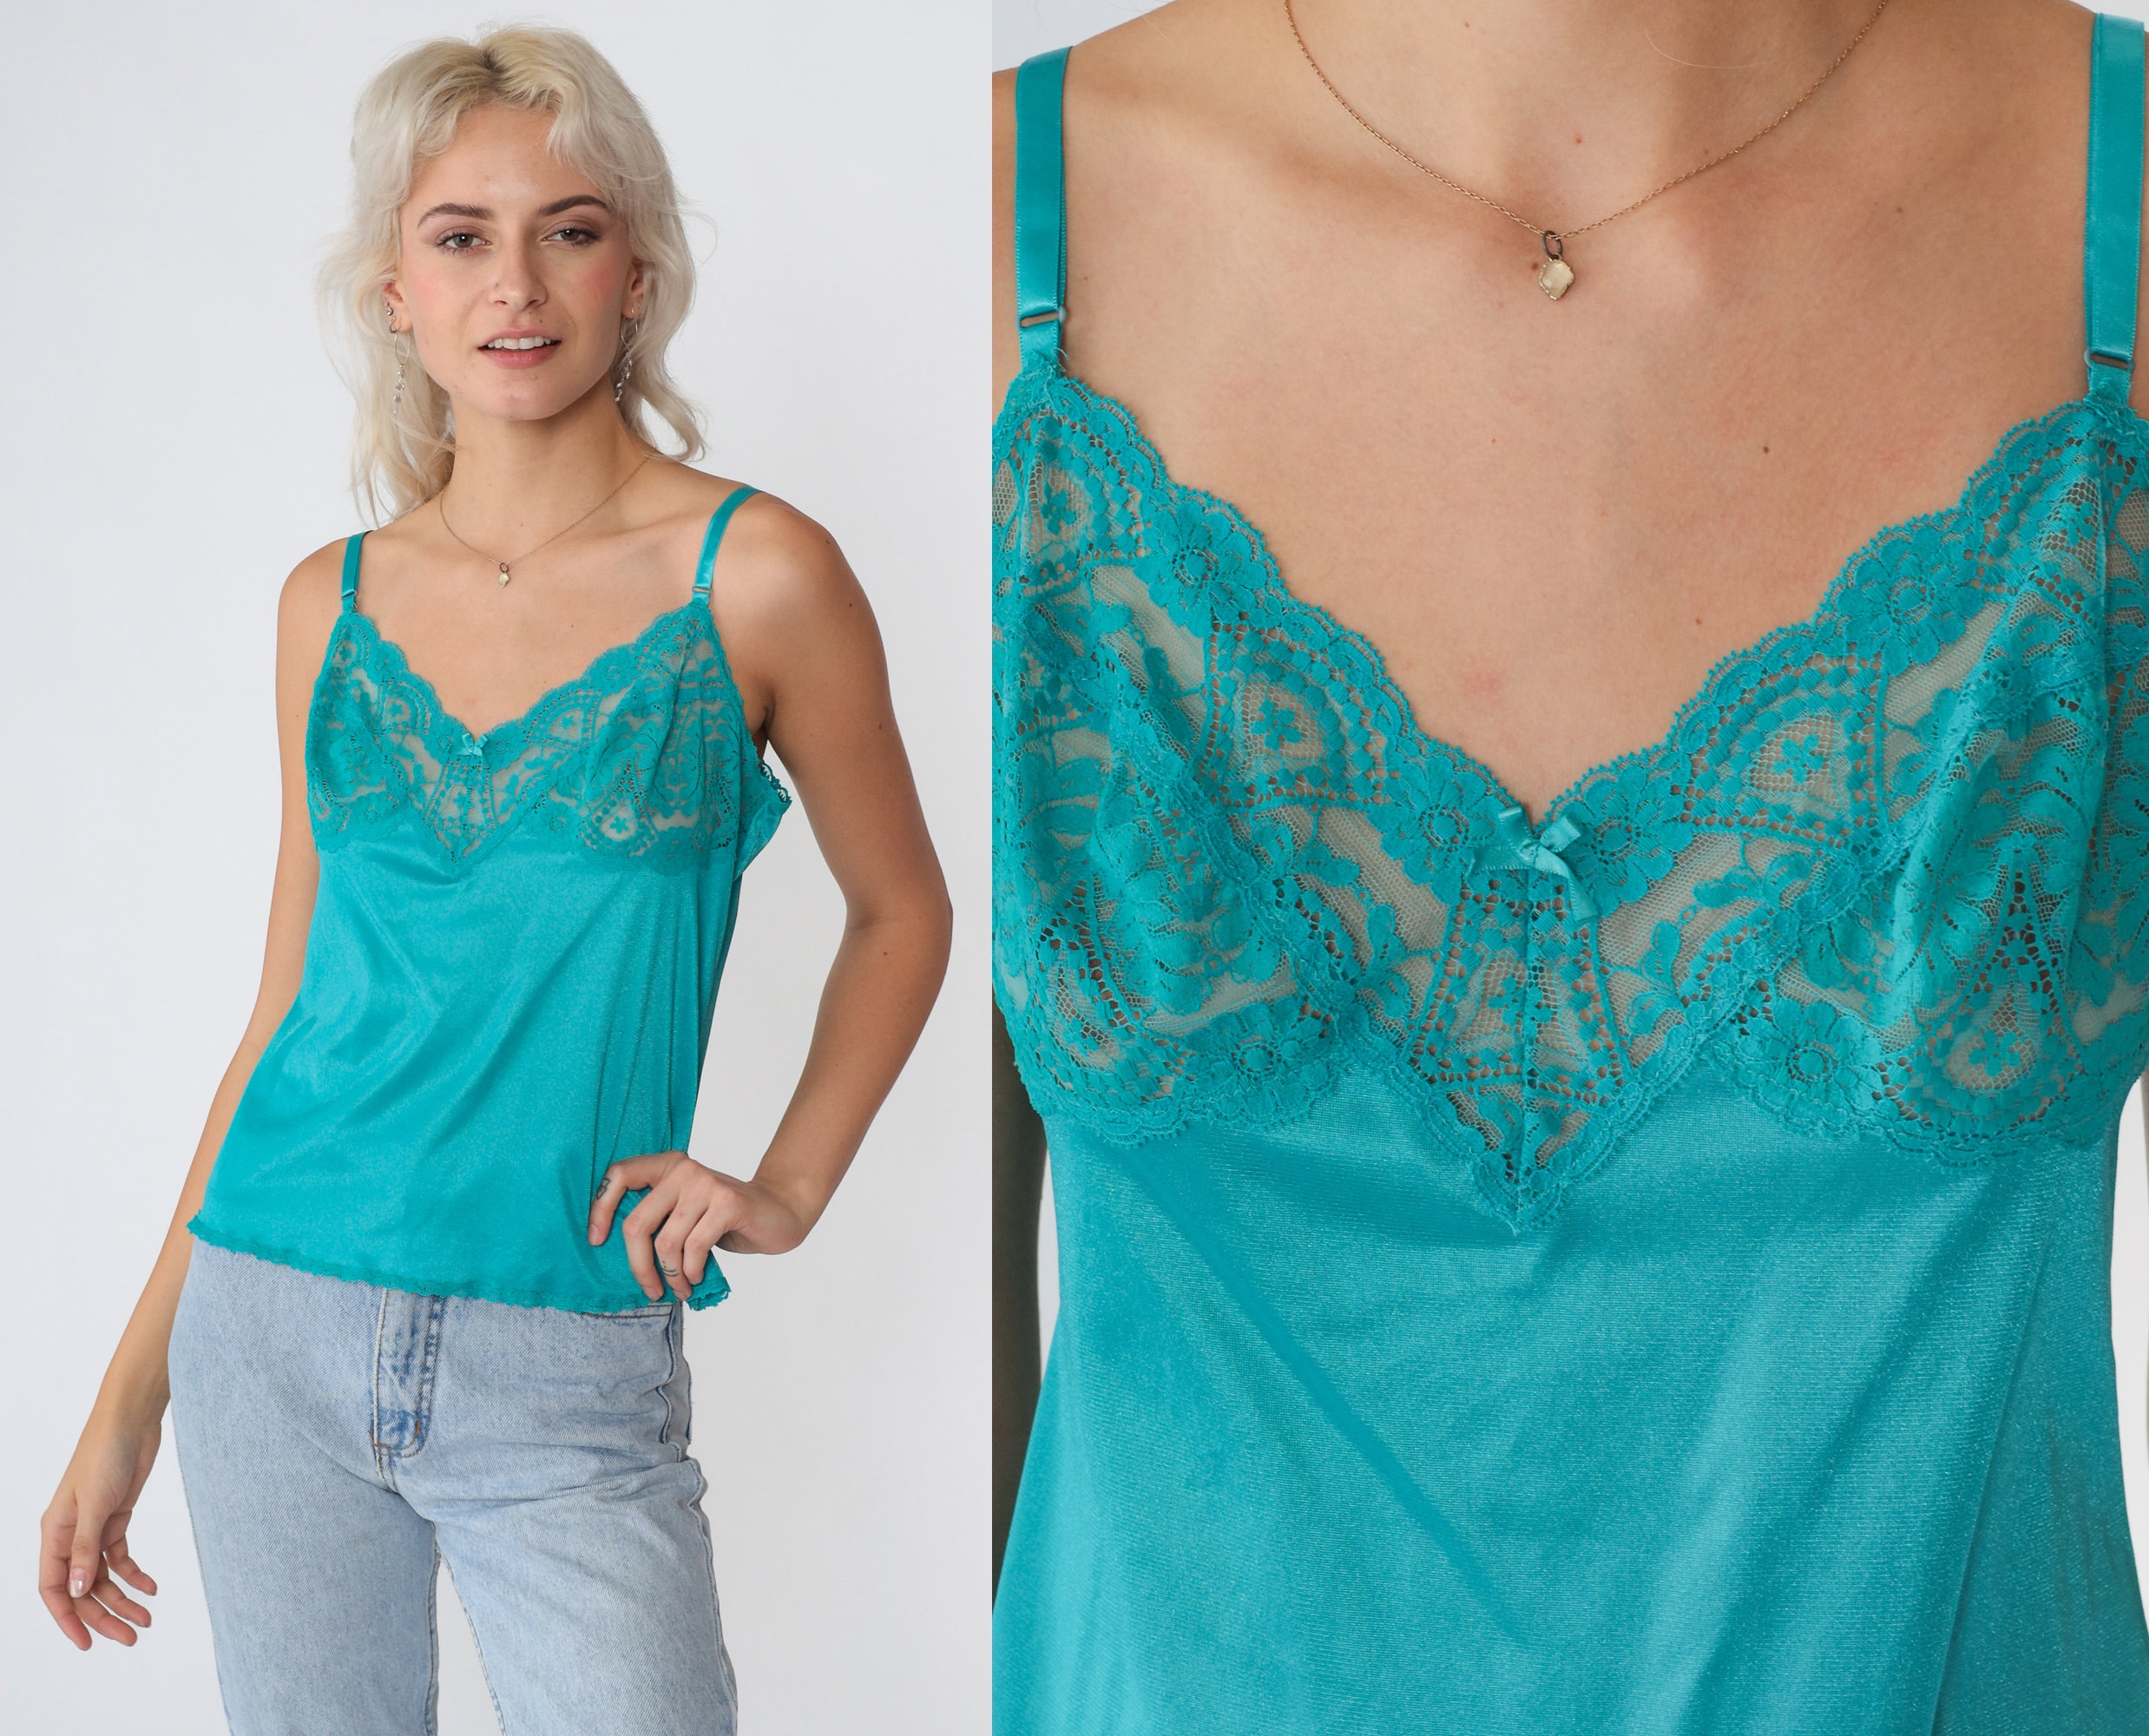 Teal Lace Camisole 90s Cami Lingerie Tank Top Sheer Floral